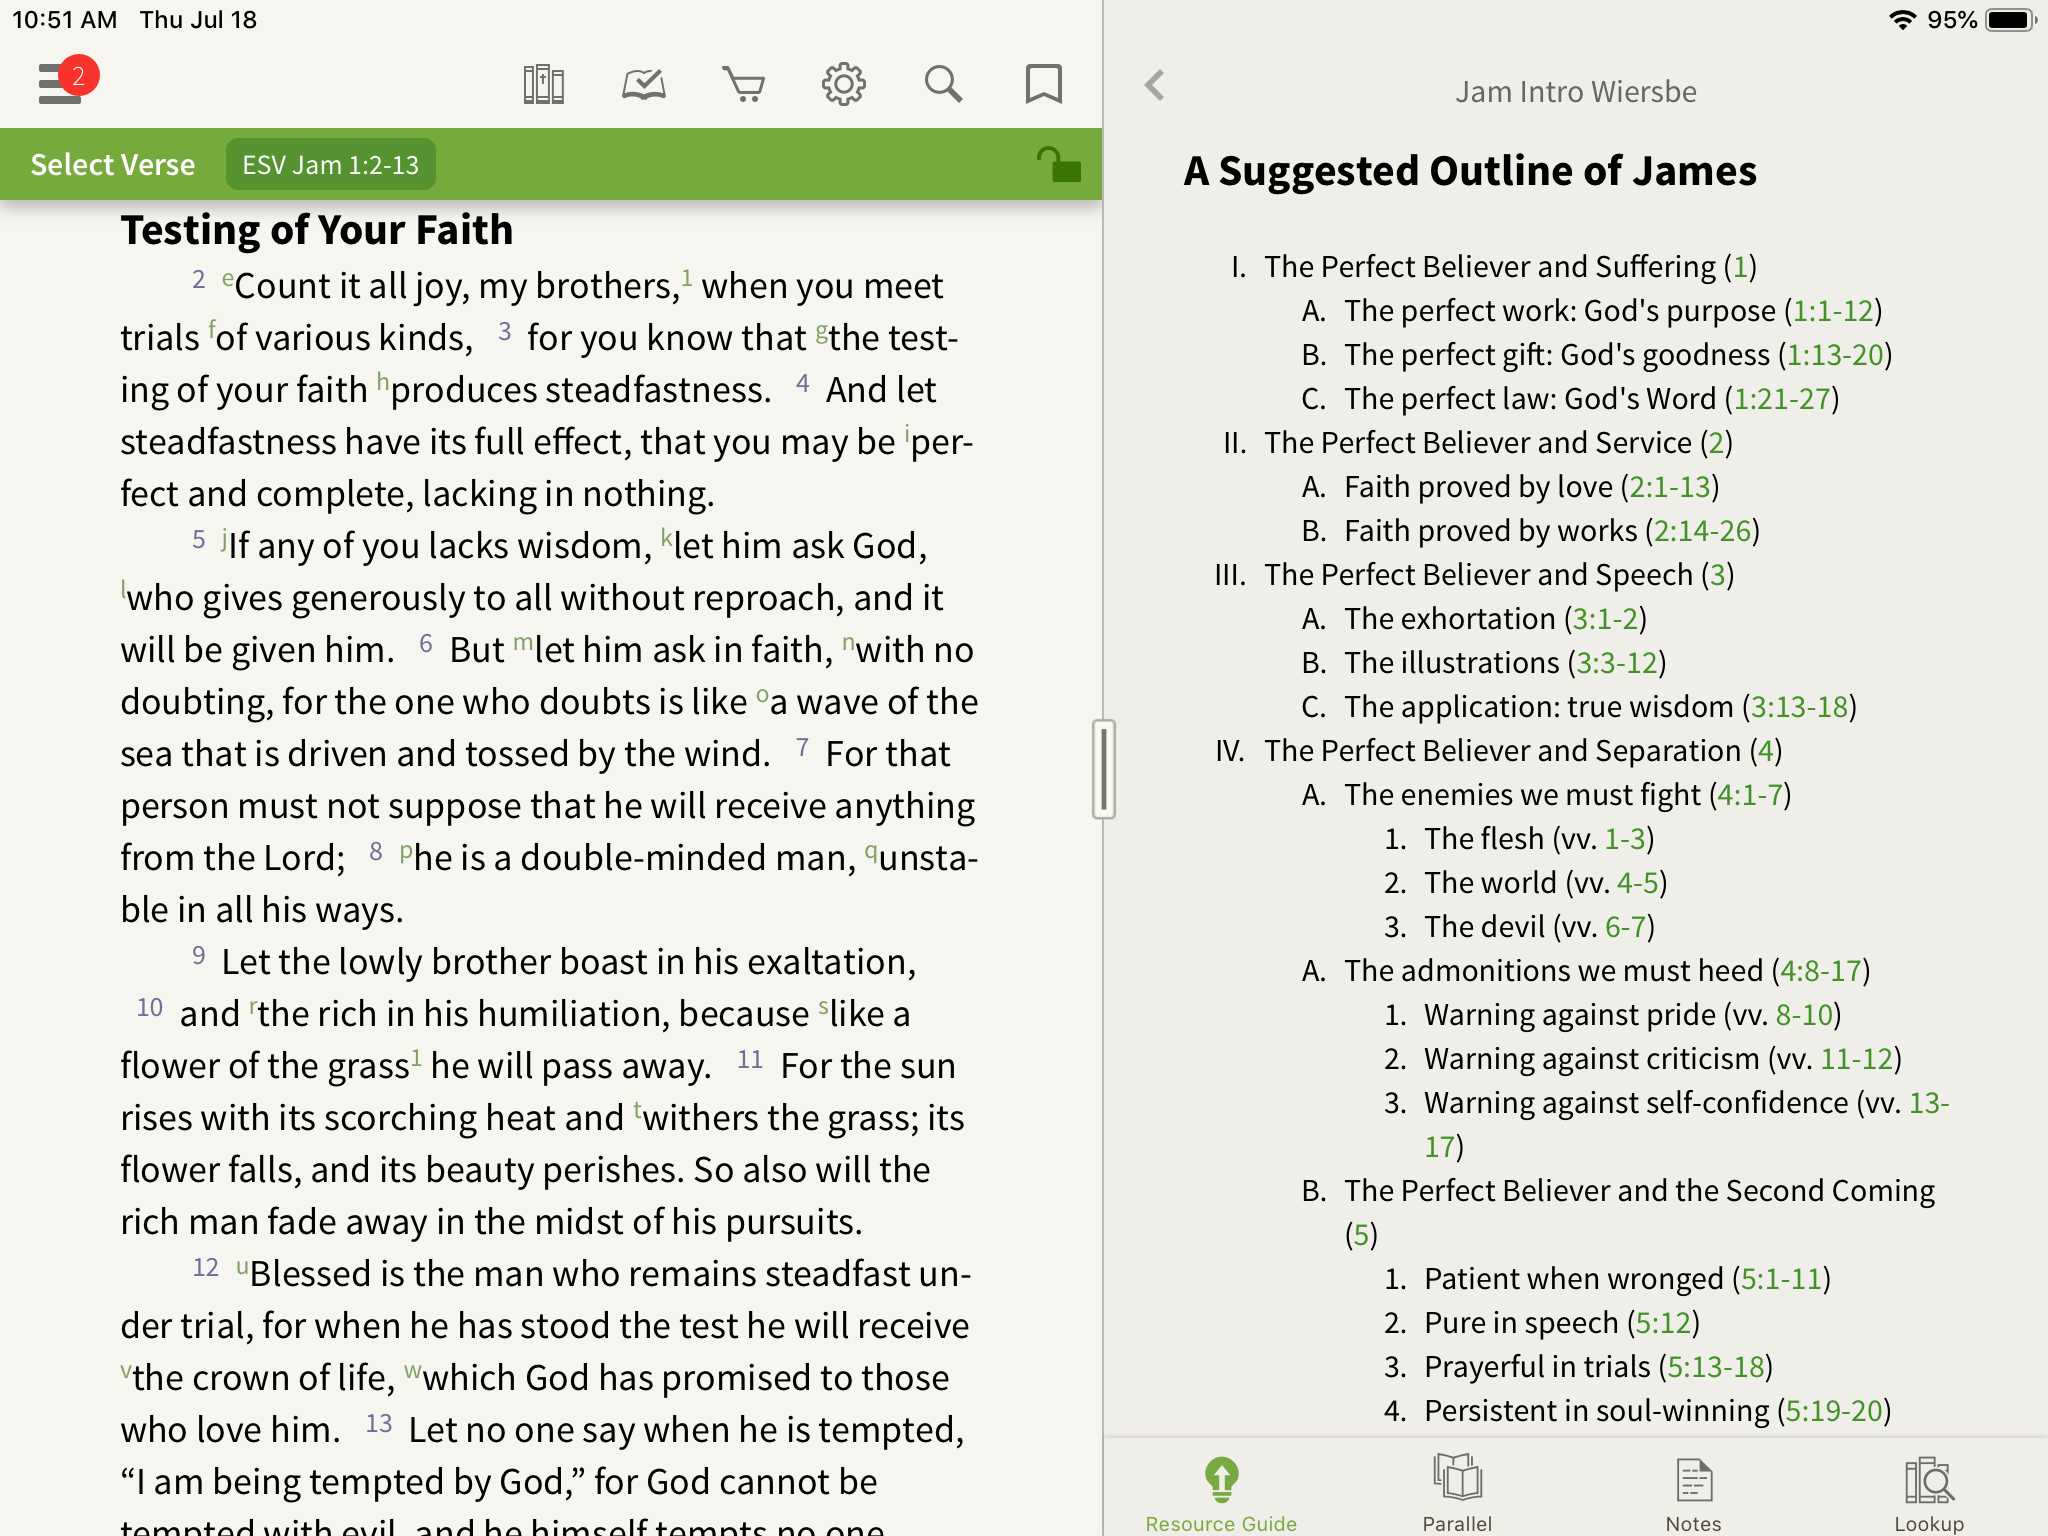 Wiersbe Expository Outlines in the Olive Tree Bible App